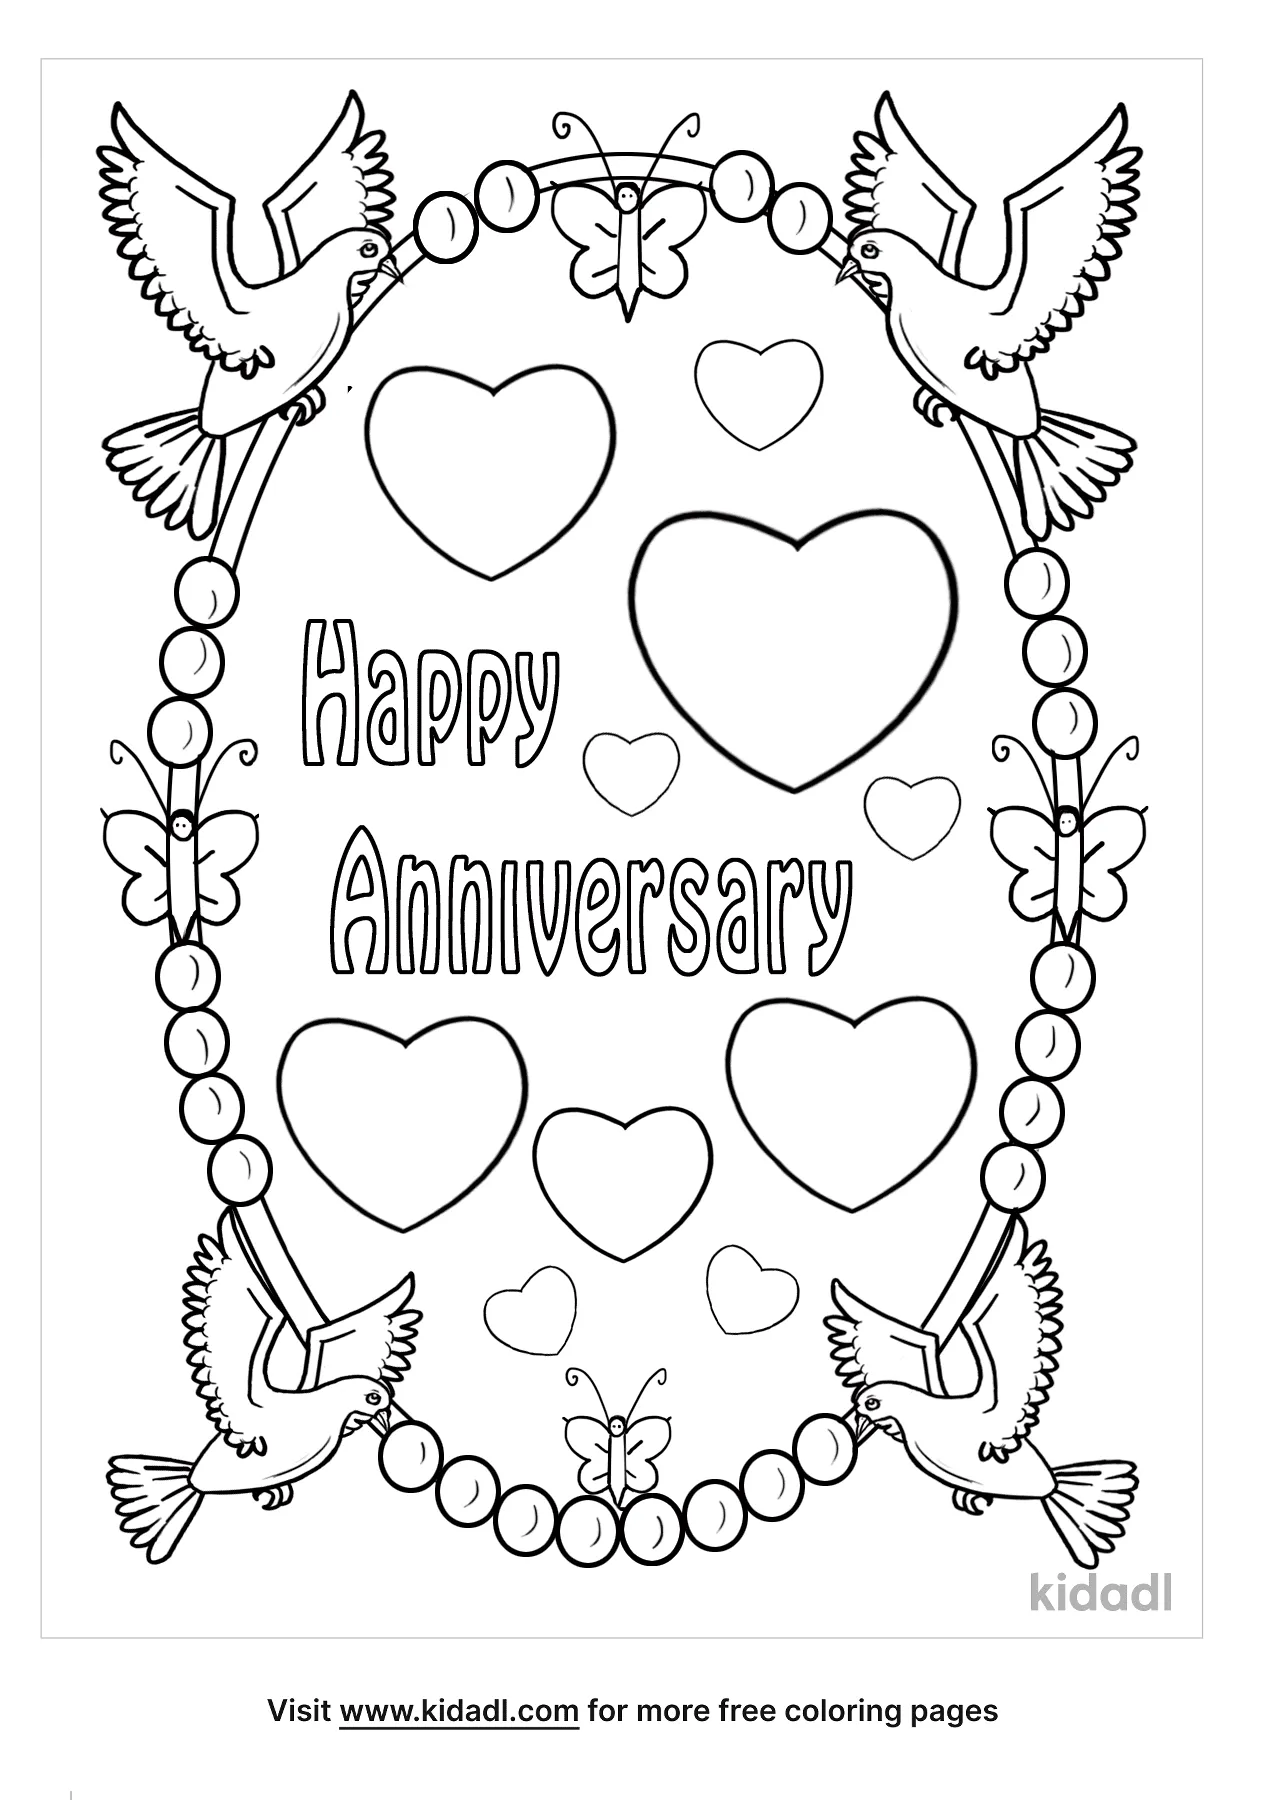 41-clever-pictures-coloring-pages-anniversary-anniversary-57068-holidays-and-special